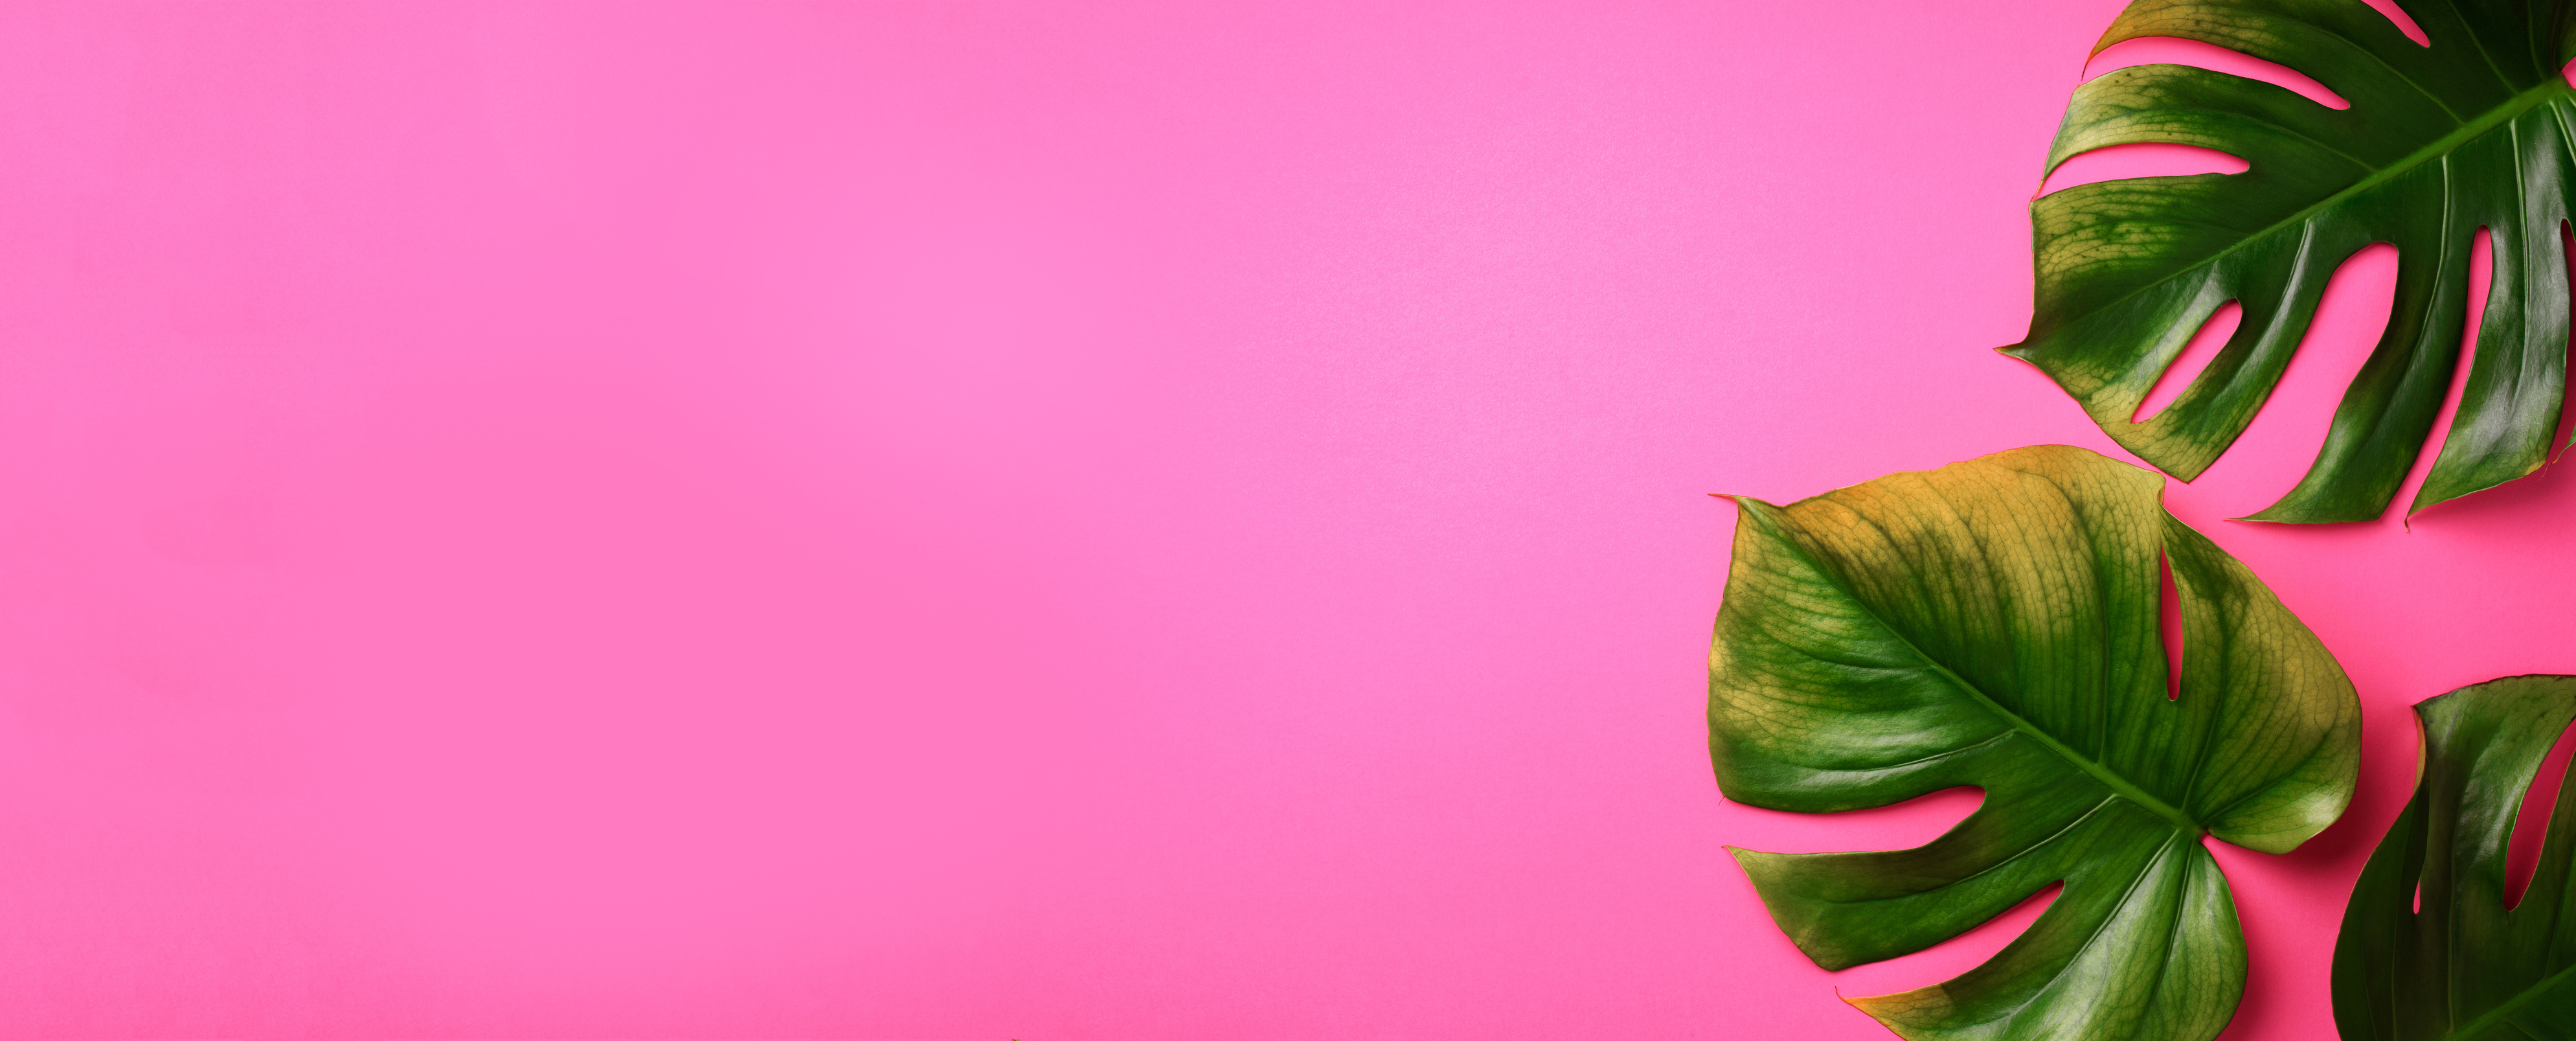 Tropical Monstera Leaves on Pink Background. Flat Lay, Top View. Creative Layout. Summer Concept. Banner